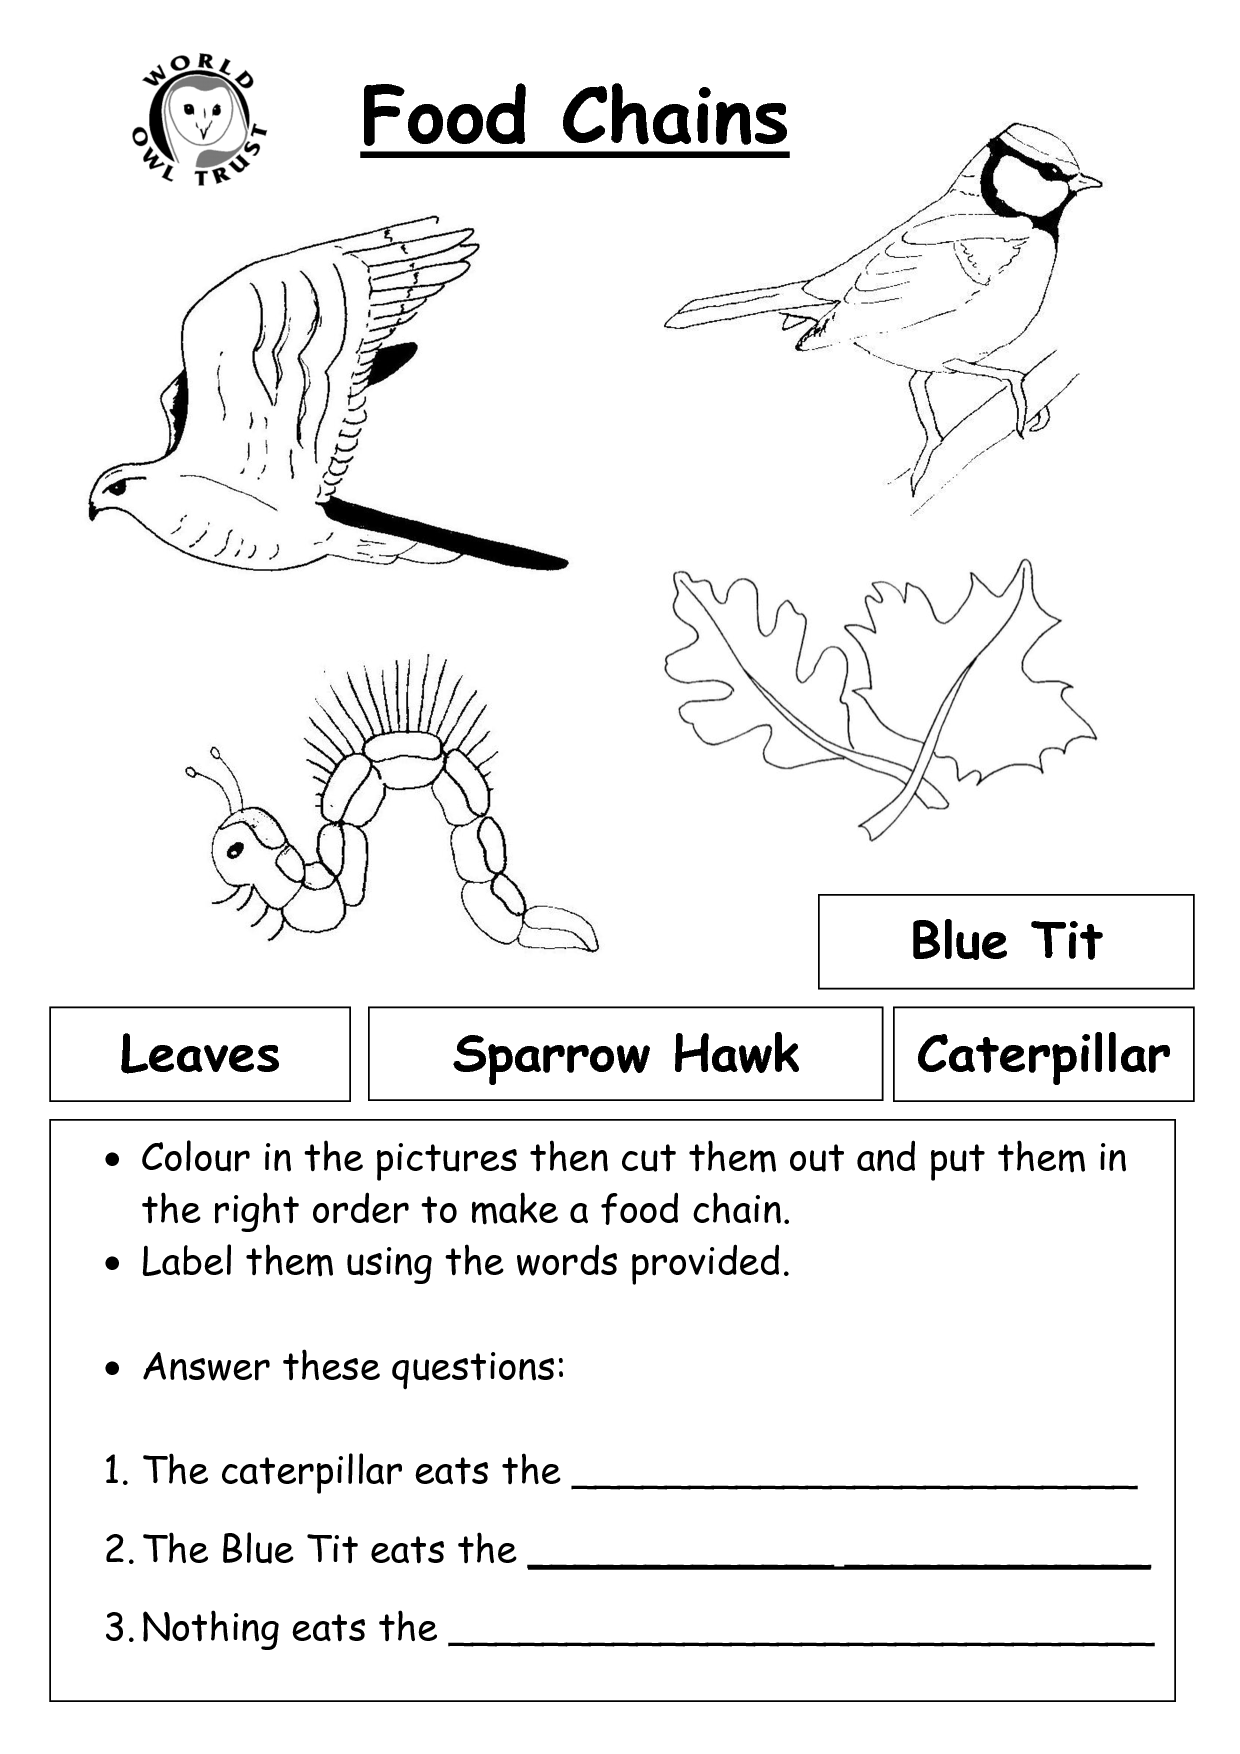 Food Chains and Webs Worksheets Image